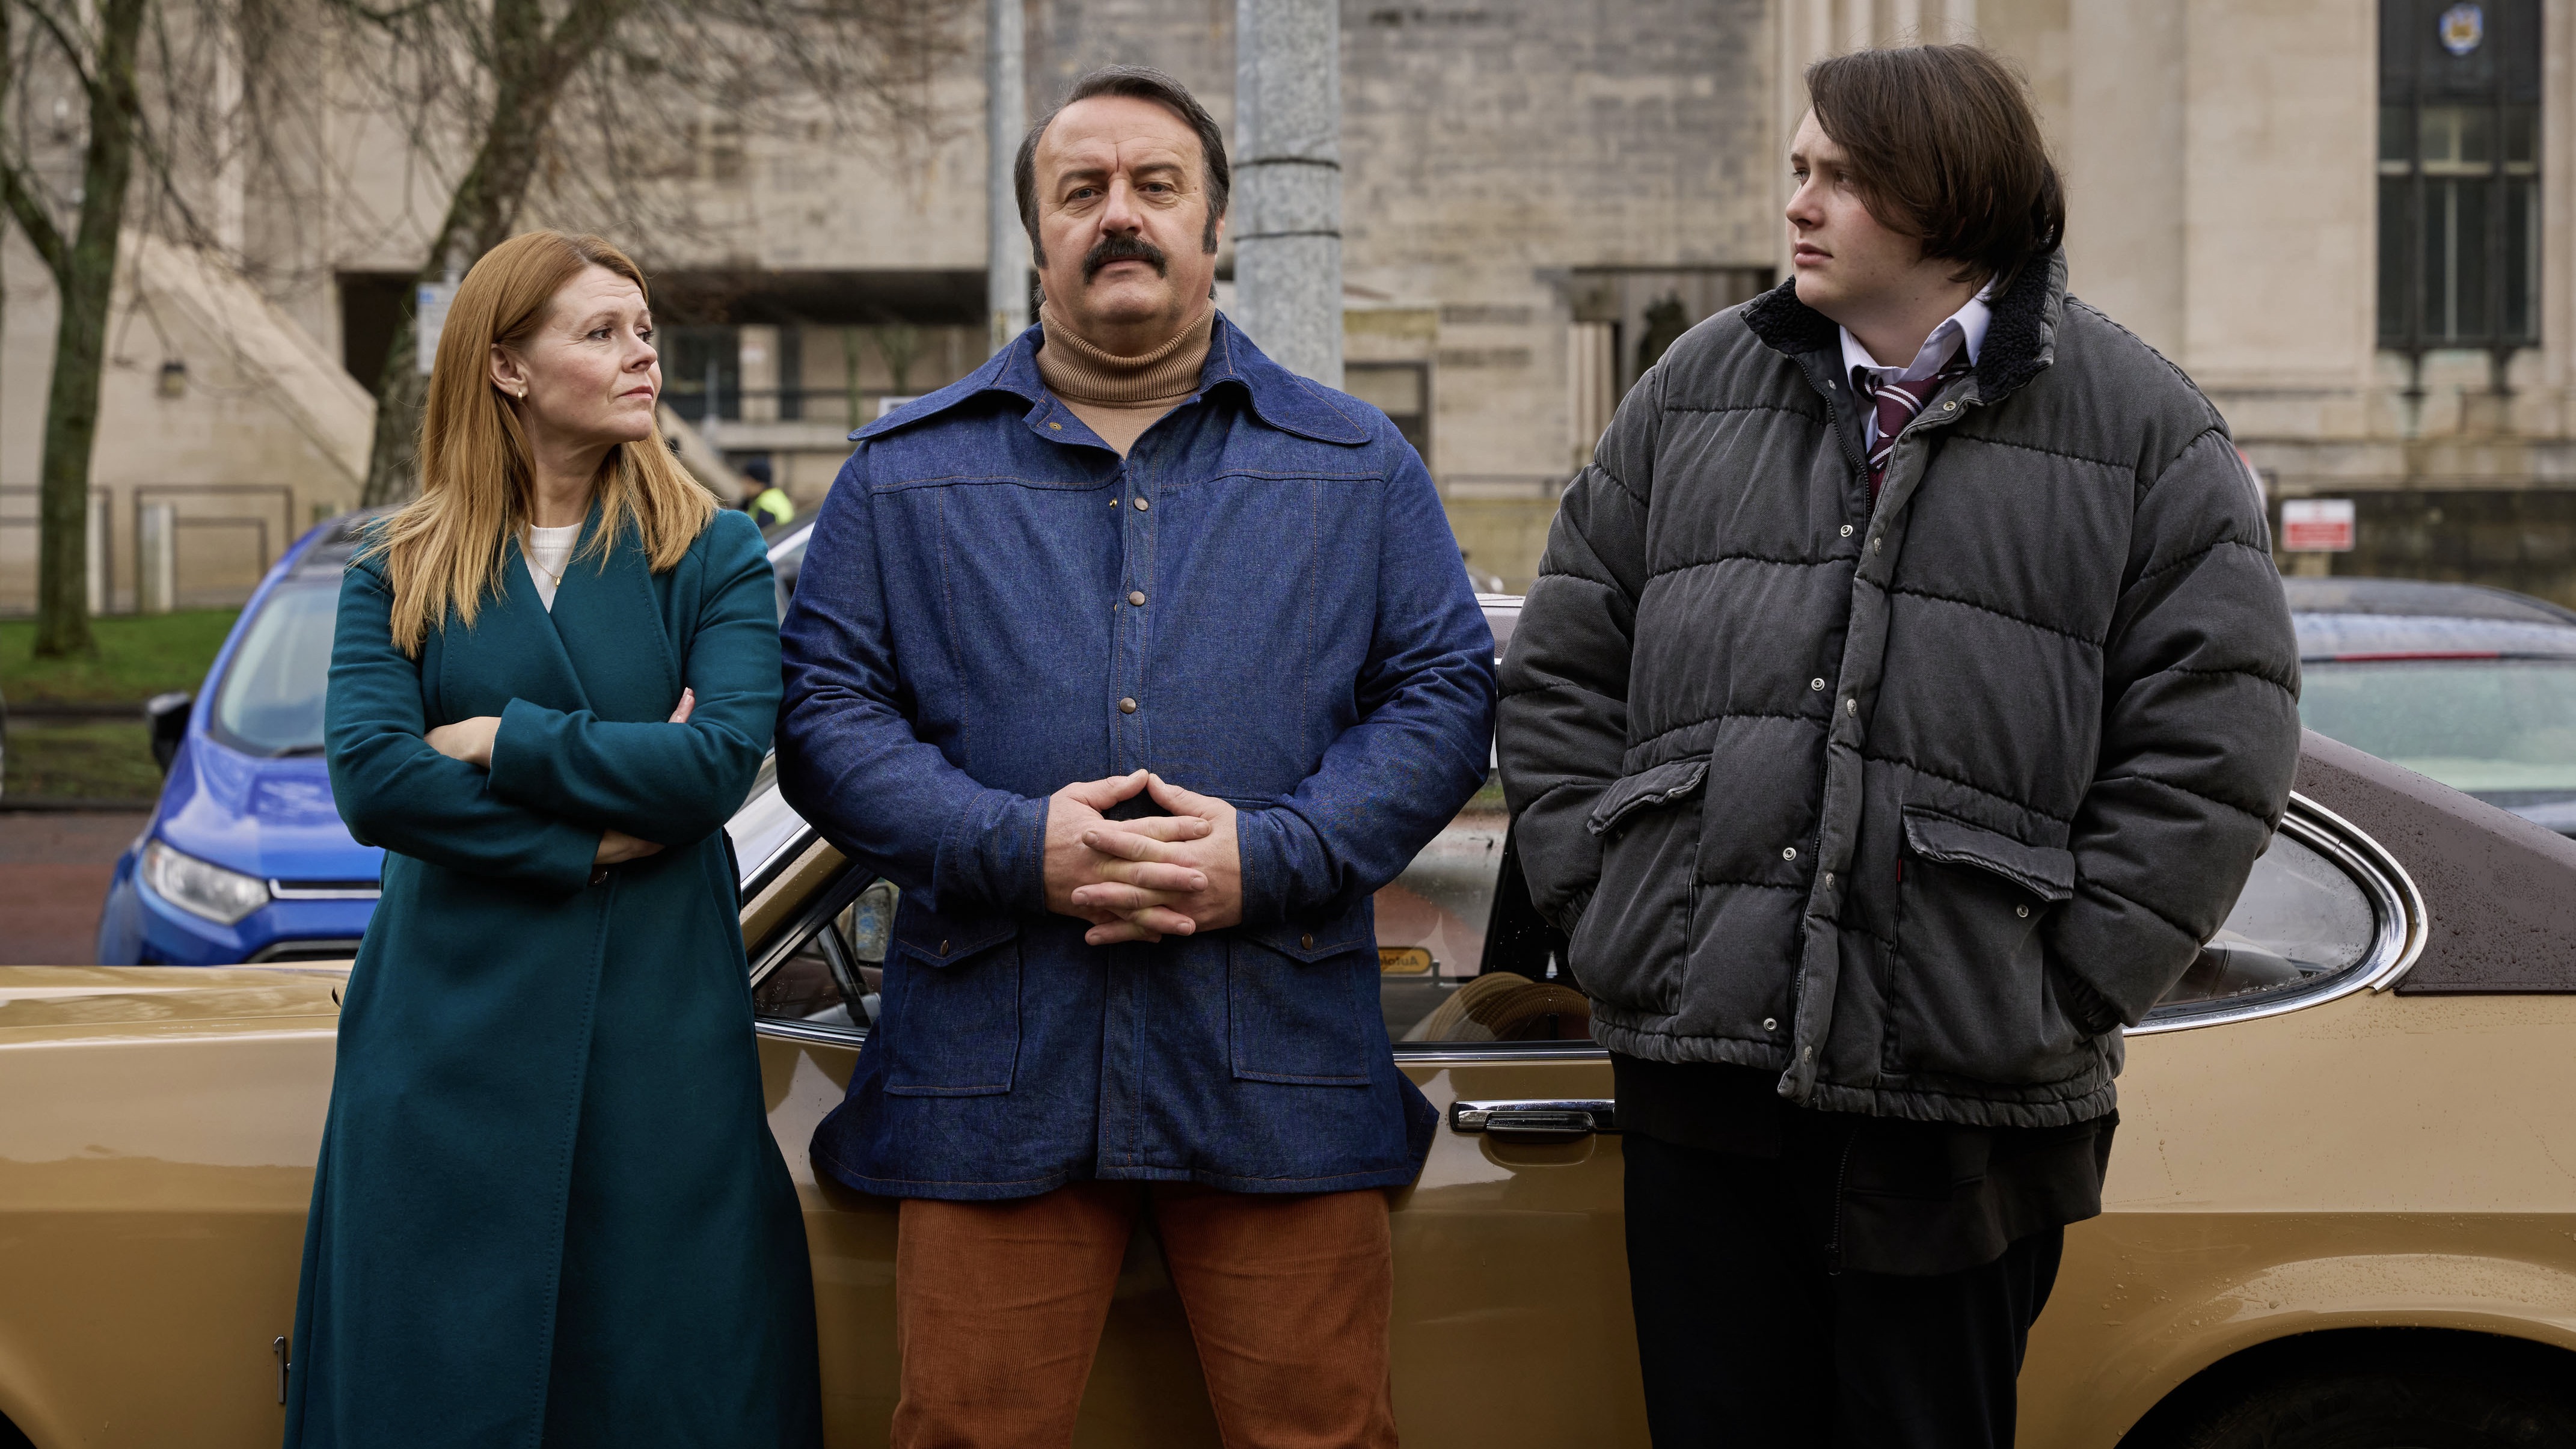 Sian Gibson in a green coat as Mel stands next to Mike Bubbins in a denim jacket as Tony Mammoth and Joel Davison in a black coat as Theo alongside a beige Ford in Mammoth.